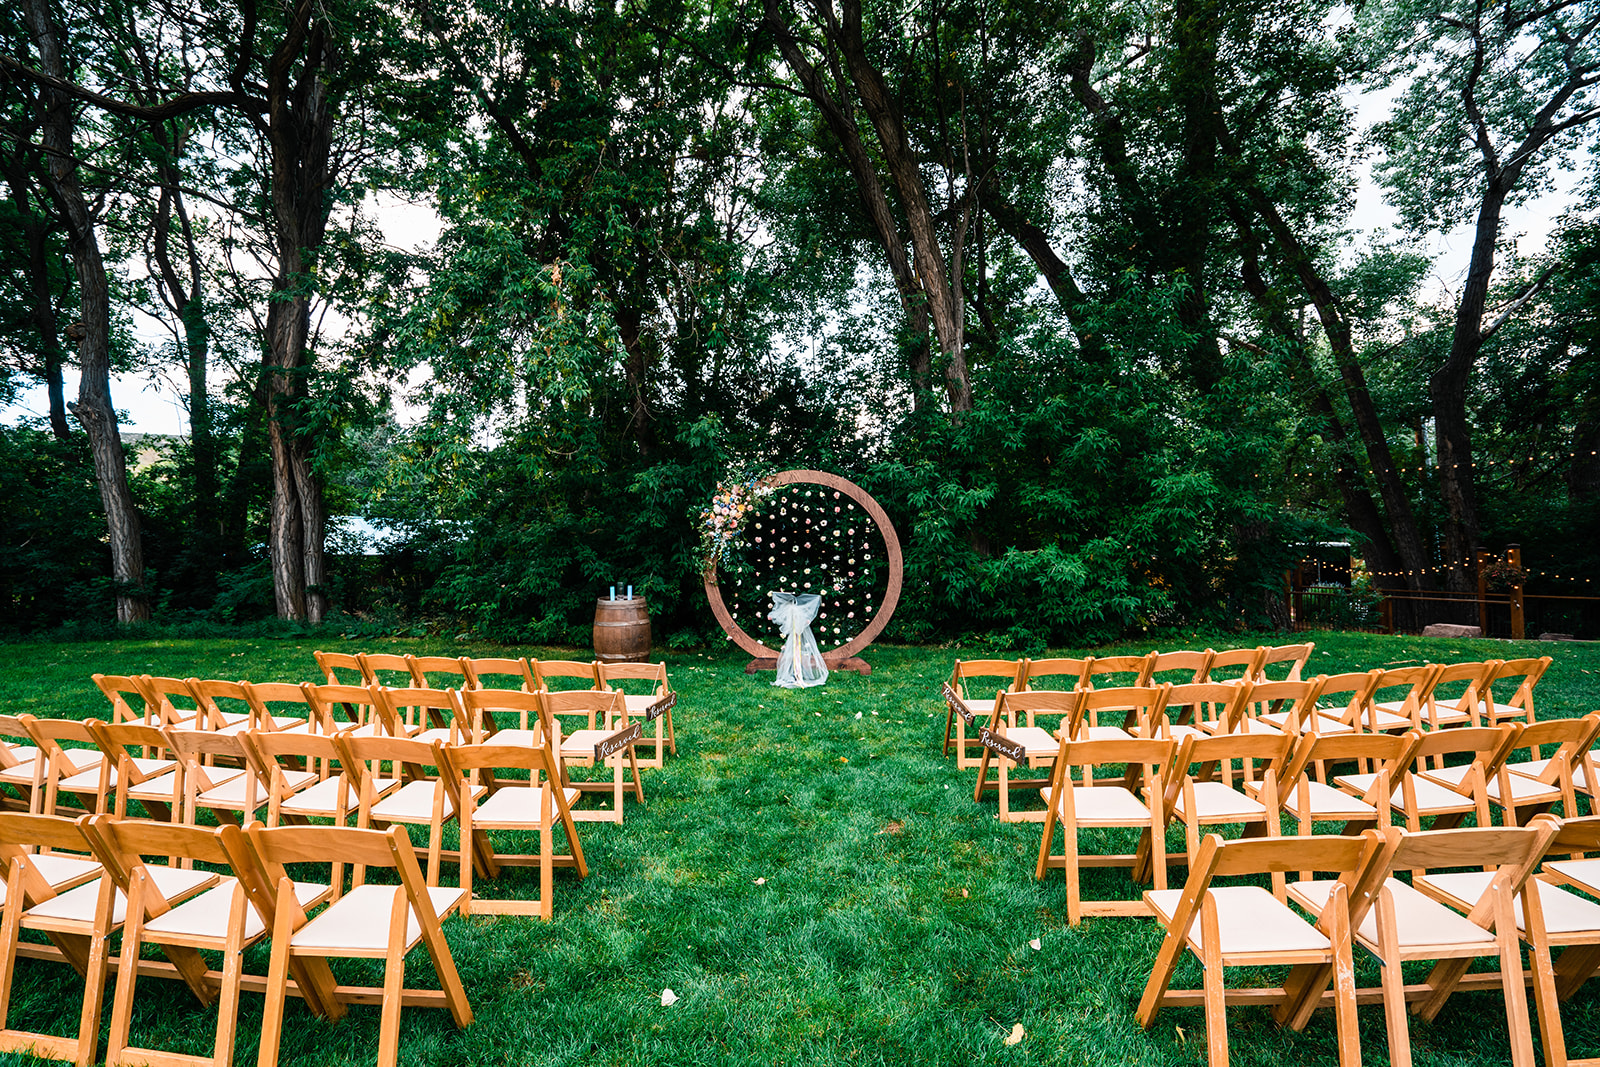 Outdoor wedding ceremony site setup with rows of wooden chairs facing a decorative circular arch in a grassy area surrounded by trees.